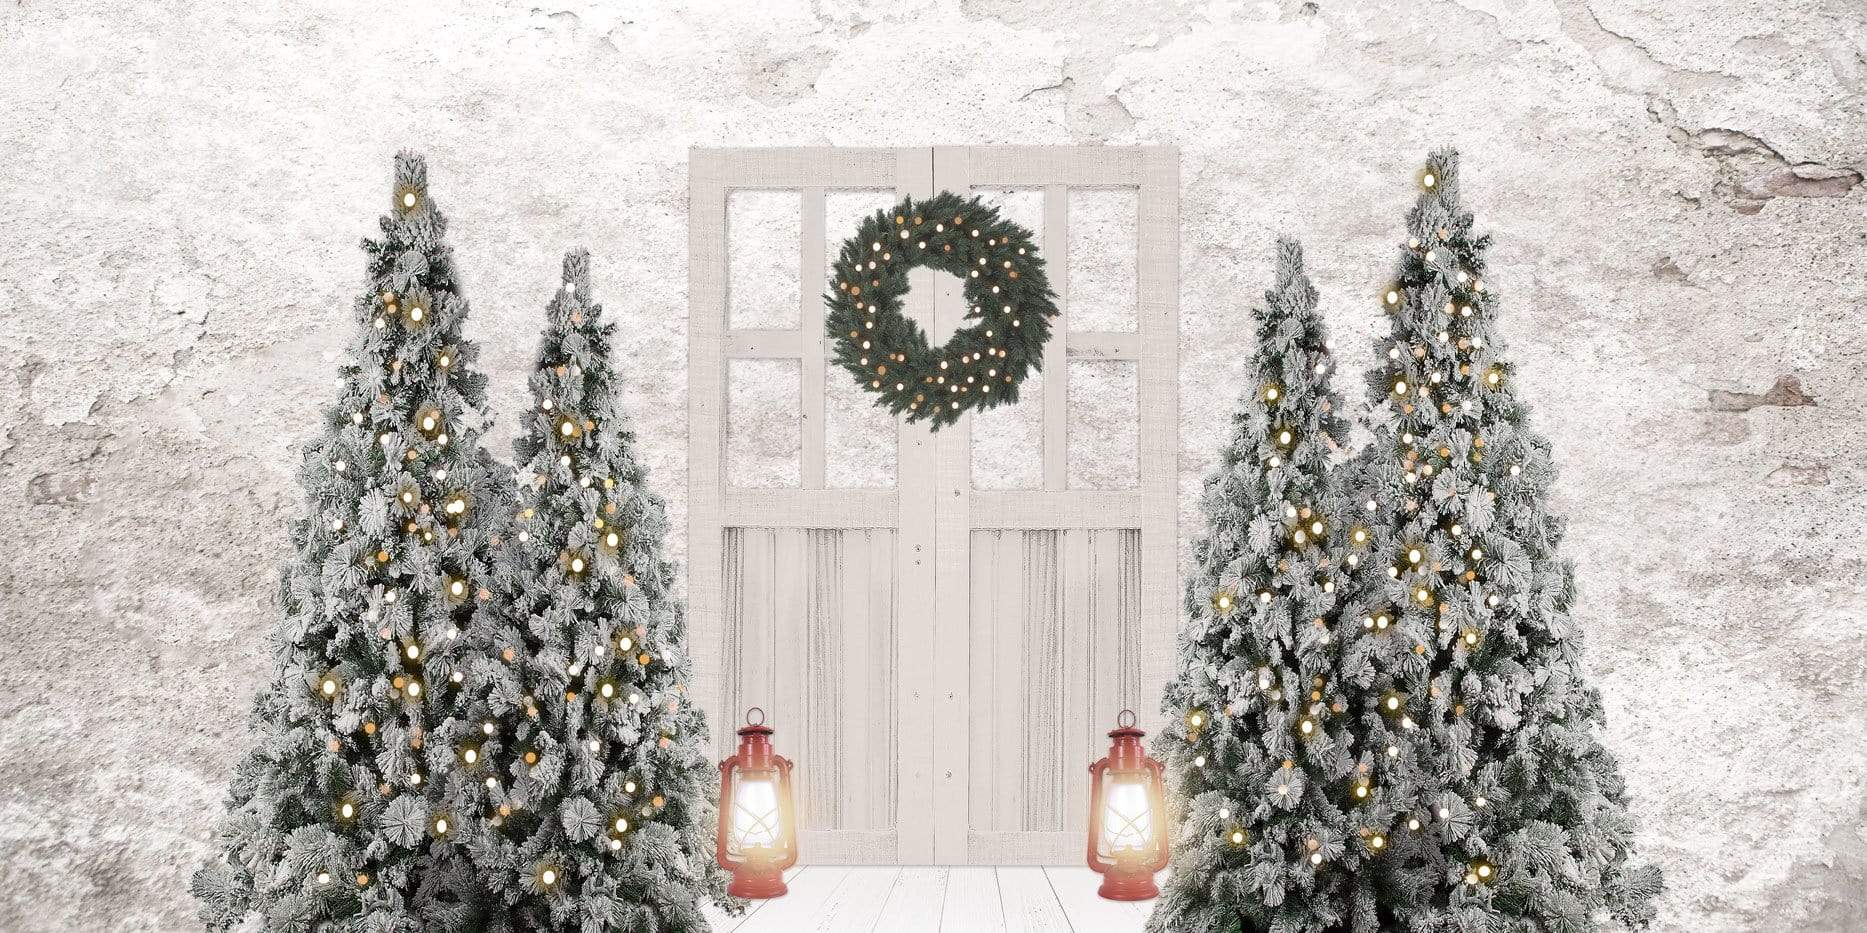 Kate Christmas Backdrop Xmas Trees Door for Photography